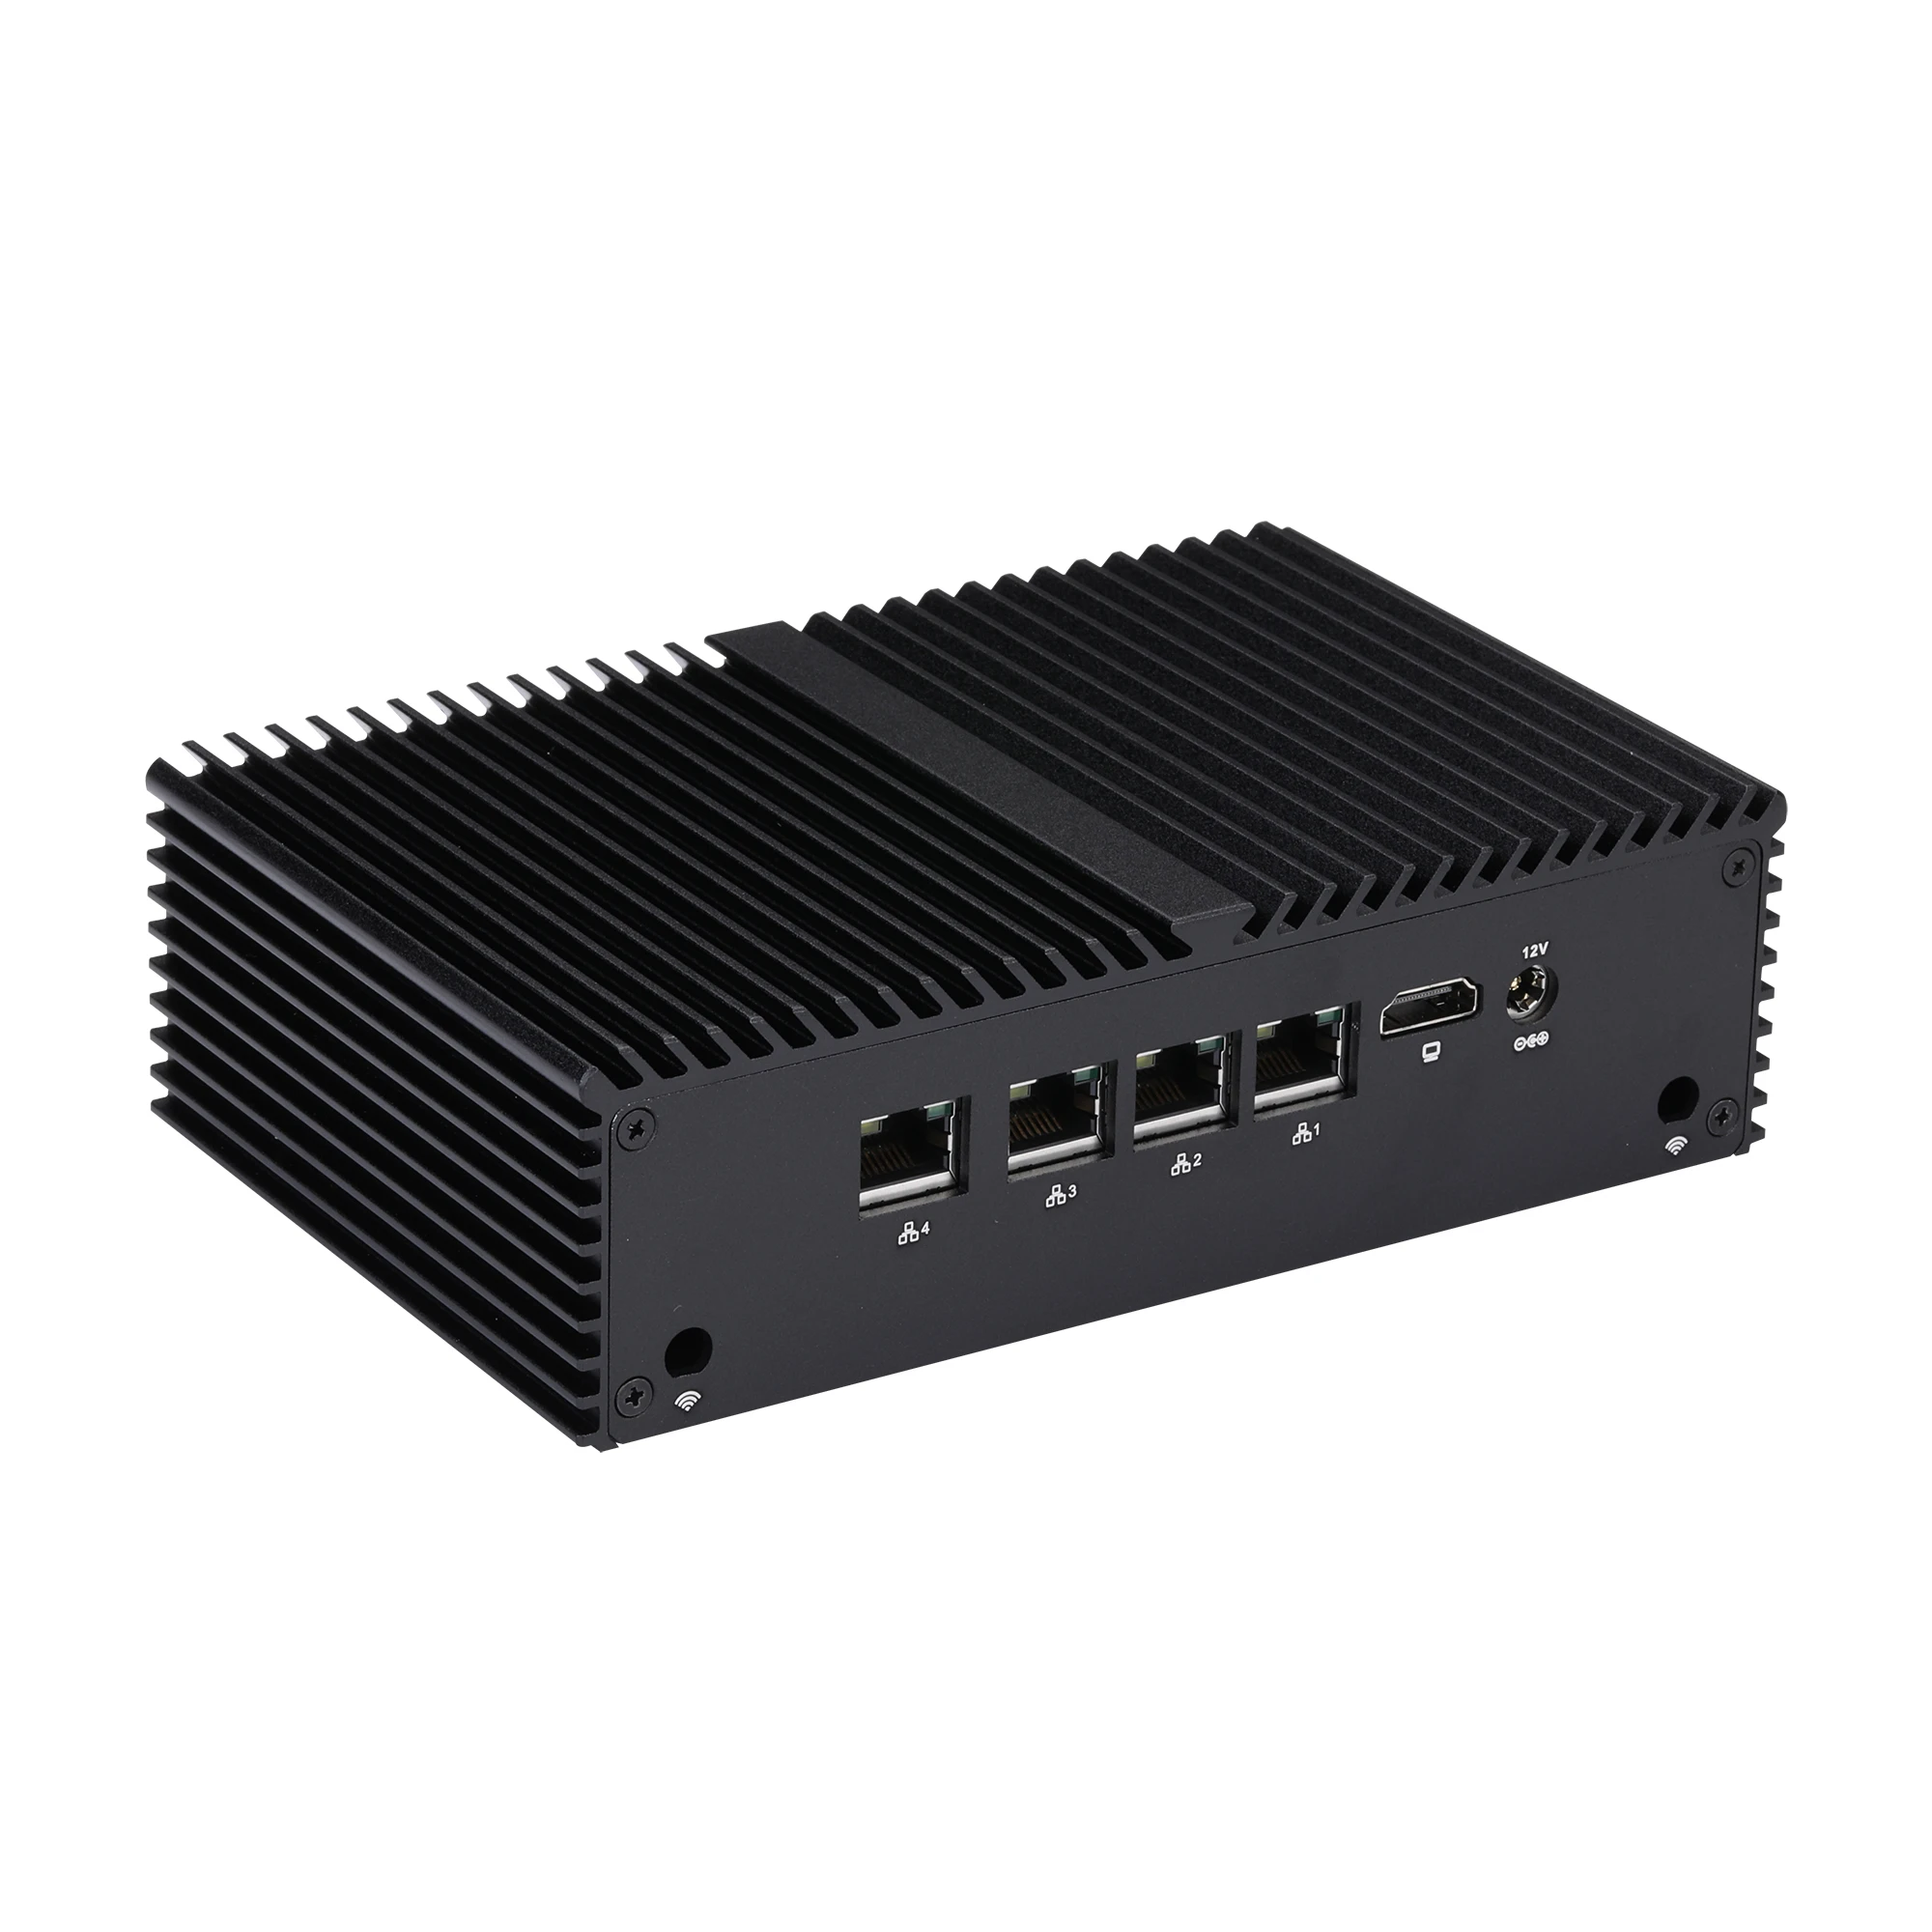 Latest New 4 LAN Mini Router with J6412 Quad Core,Support PFsense,Firewall,Cent os. images - 6